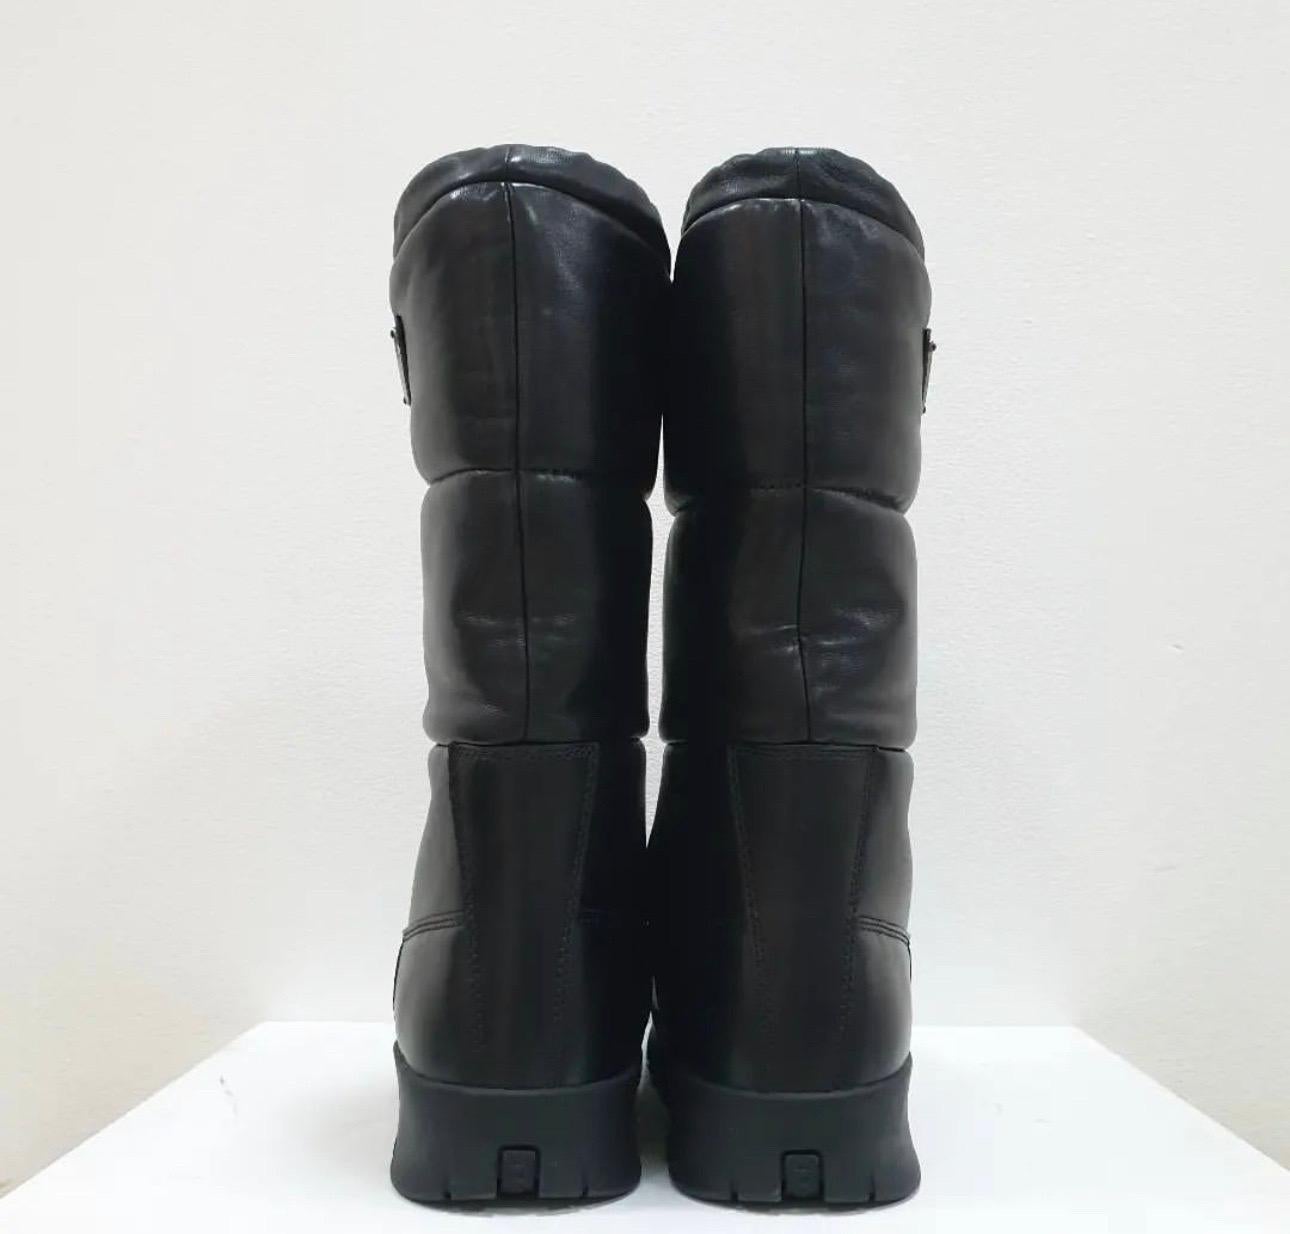 Prada Low Wedge Leather Boots In Good Condition For Sale In Krakow, PL